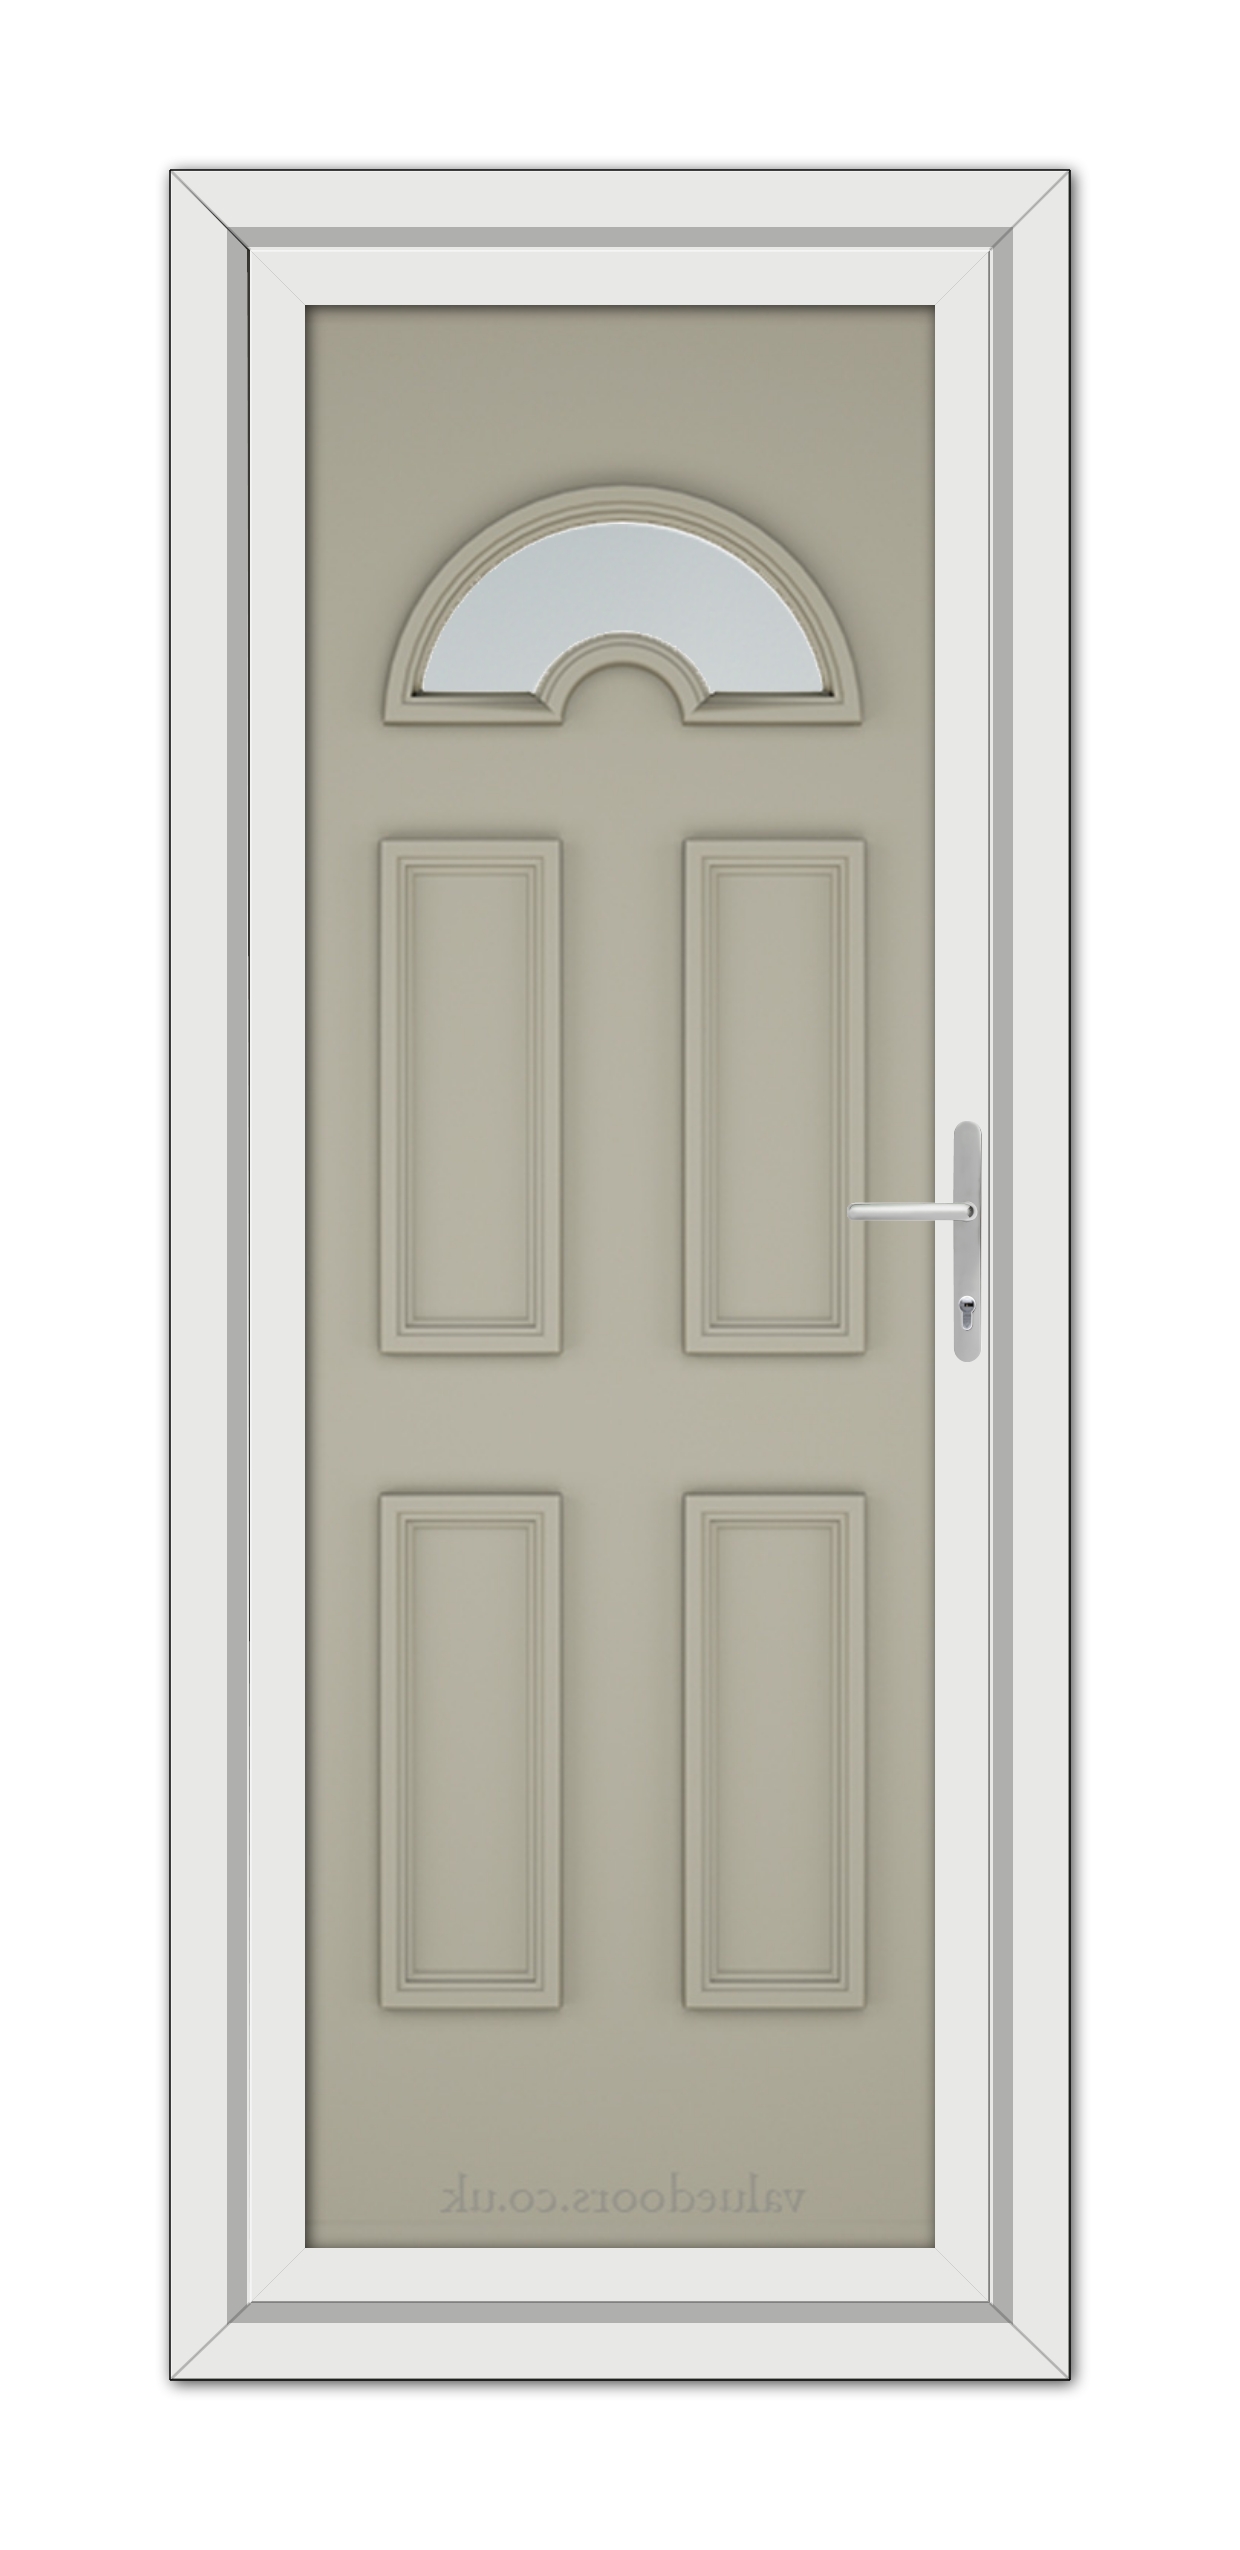 A modern Pebble Grey Sandringham uPVC door featuring a silver handle and a semicircular frosted glass window at the top, framed within a white doorframe.